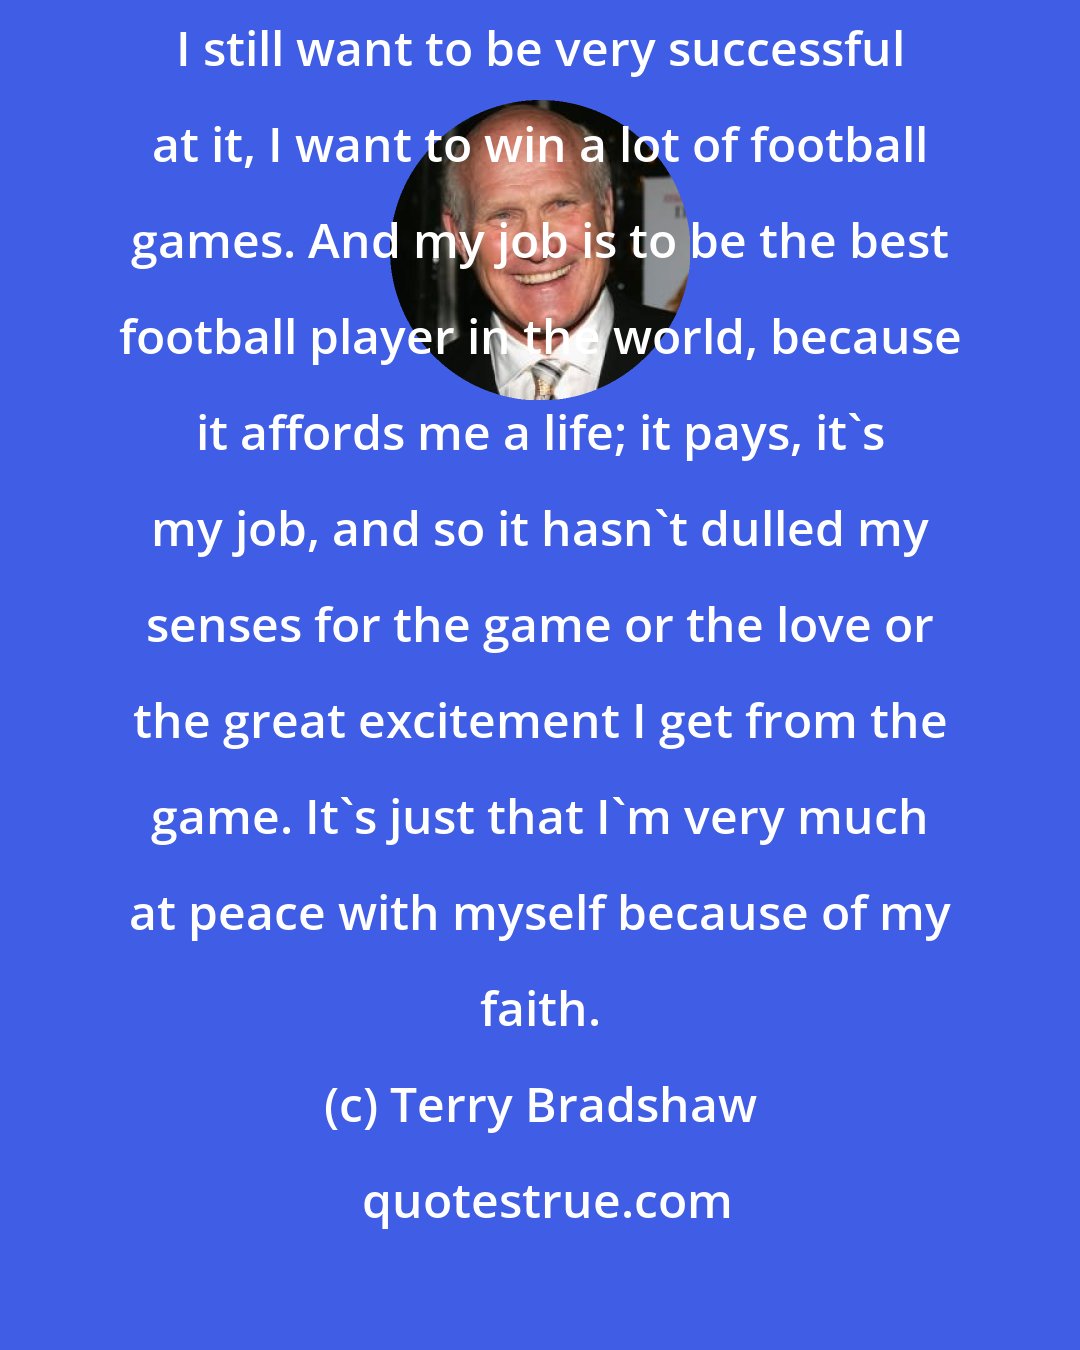 Terry Bradshaw: Football used to be my god but no longer is. I still love it, I'm still aggressive, I still want to be very successful at it, I want to win a lot of football games. And my job is to be the best football player in the world, because it affords me a life; it pays, it's my job, and so it hasn't dulled my senses for the game or the love or the great excitement I get from the game. It's just that I'm very much at peace with myself because of my faith.